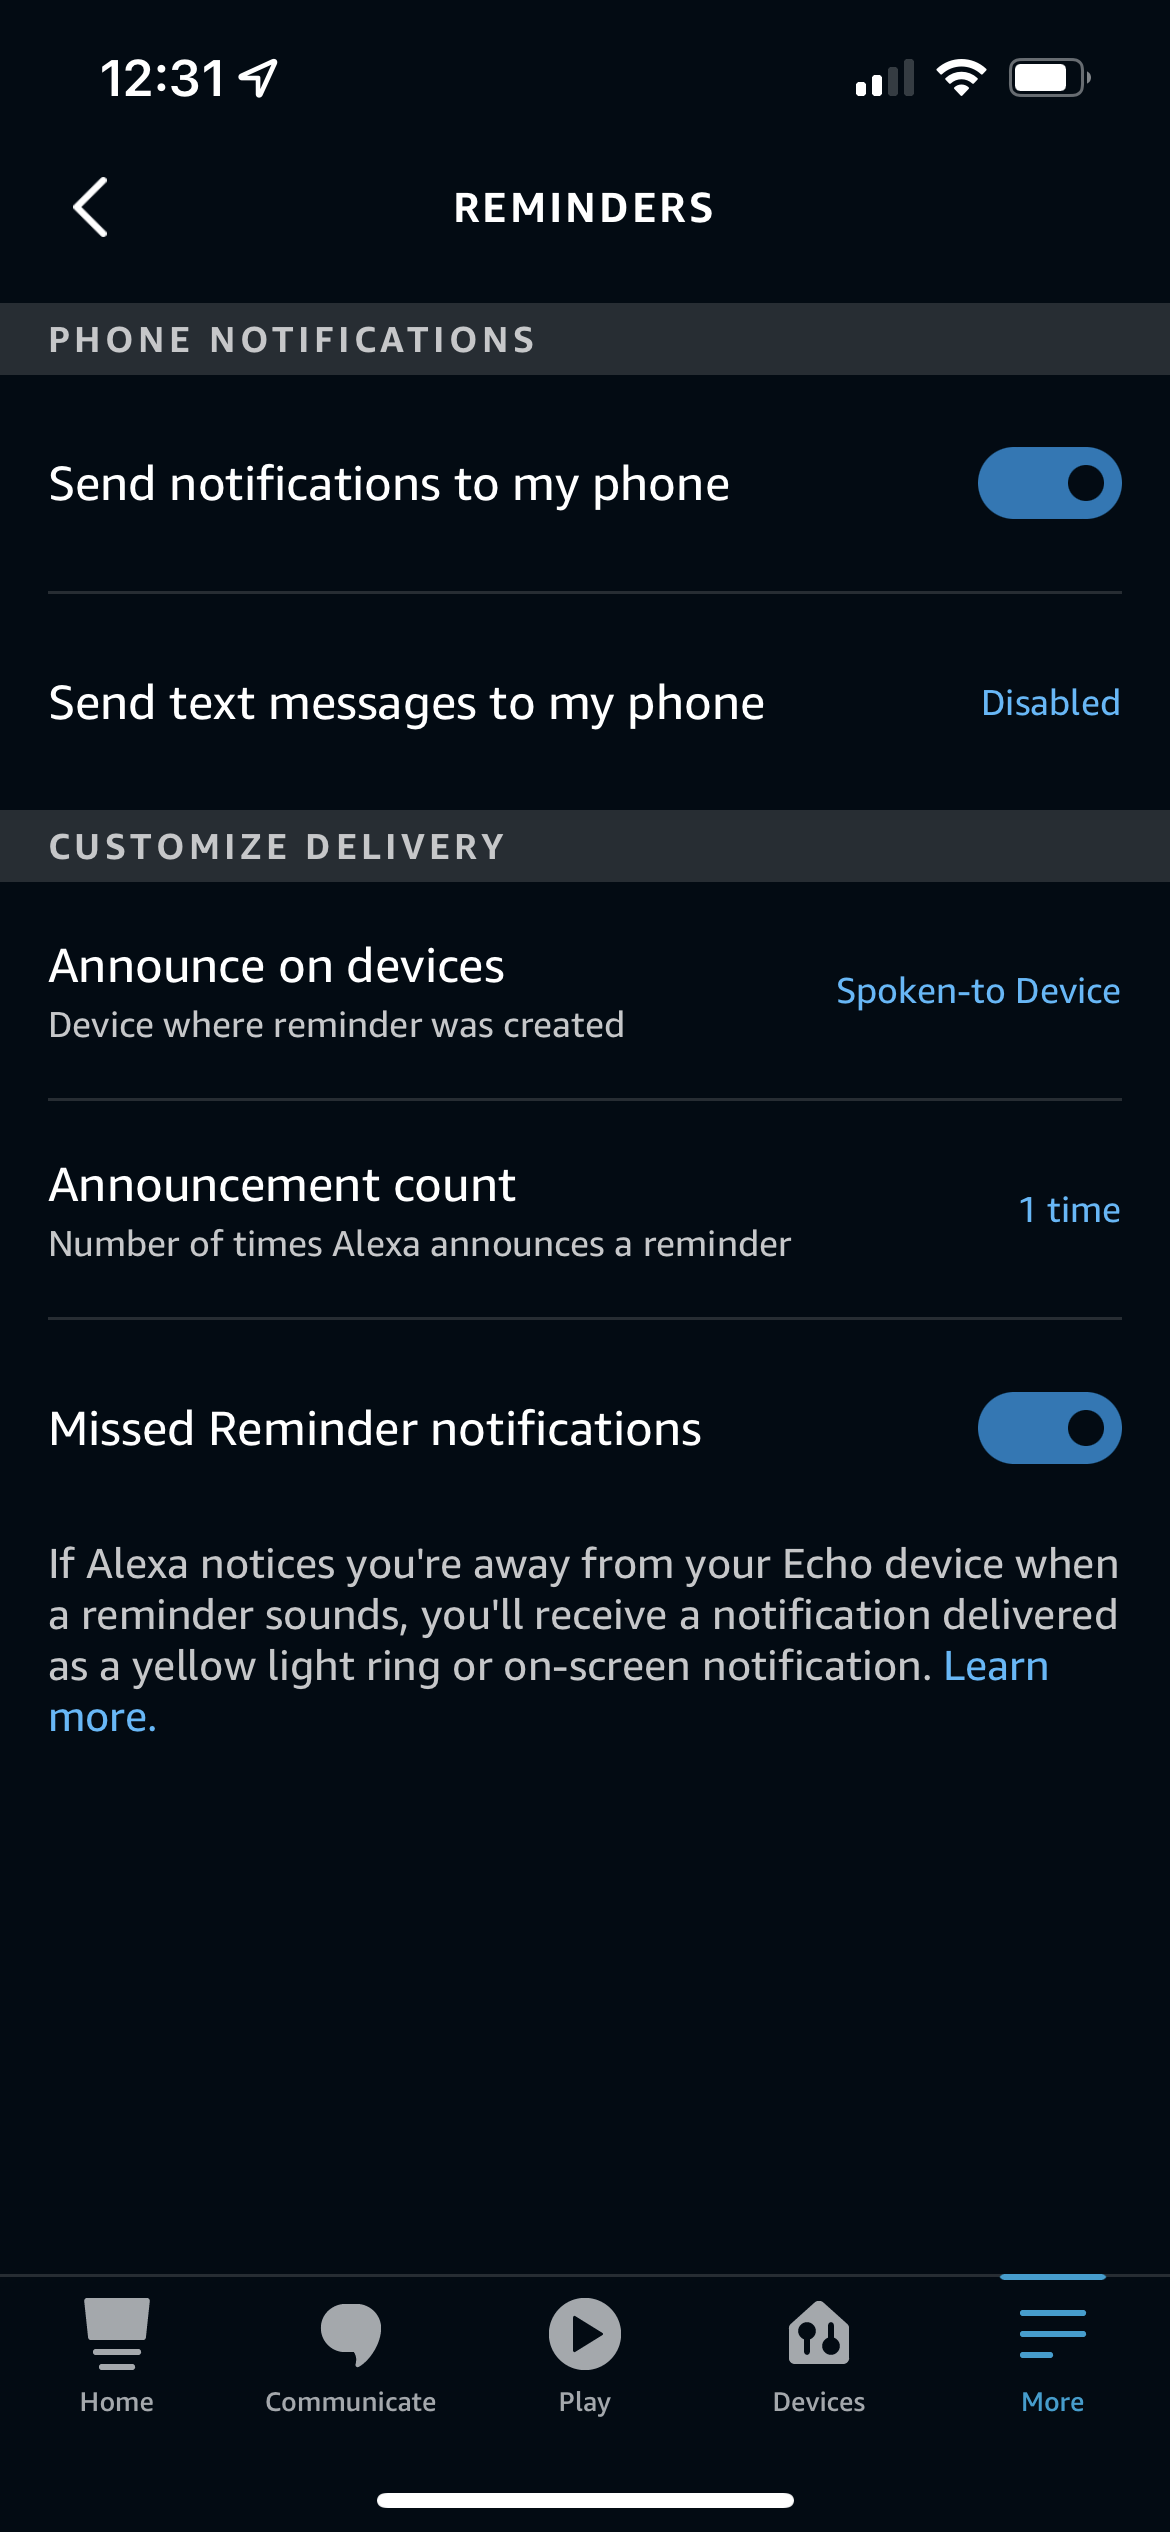 Setting reminder preferences in the Amazon Alexa app